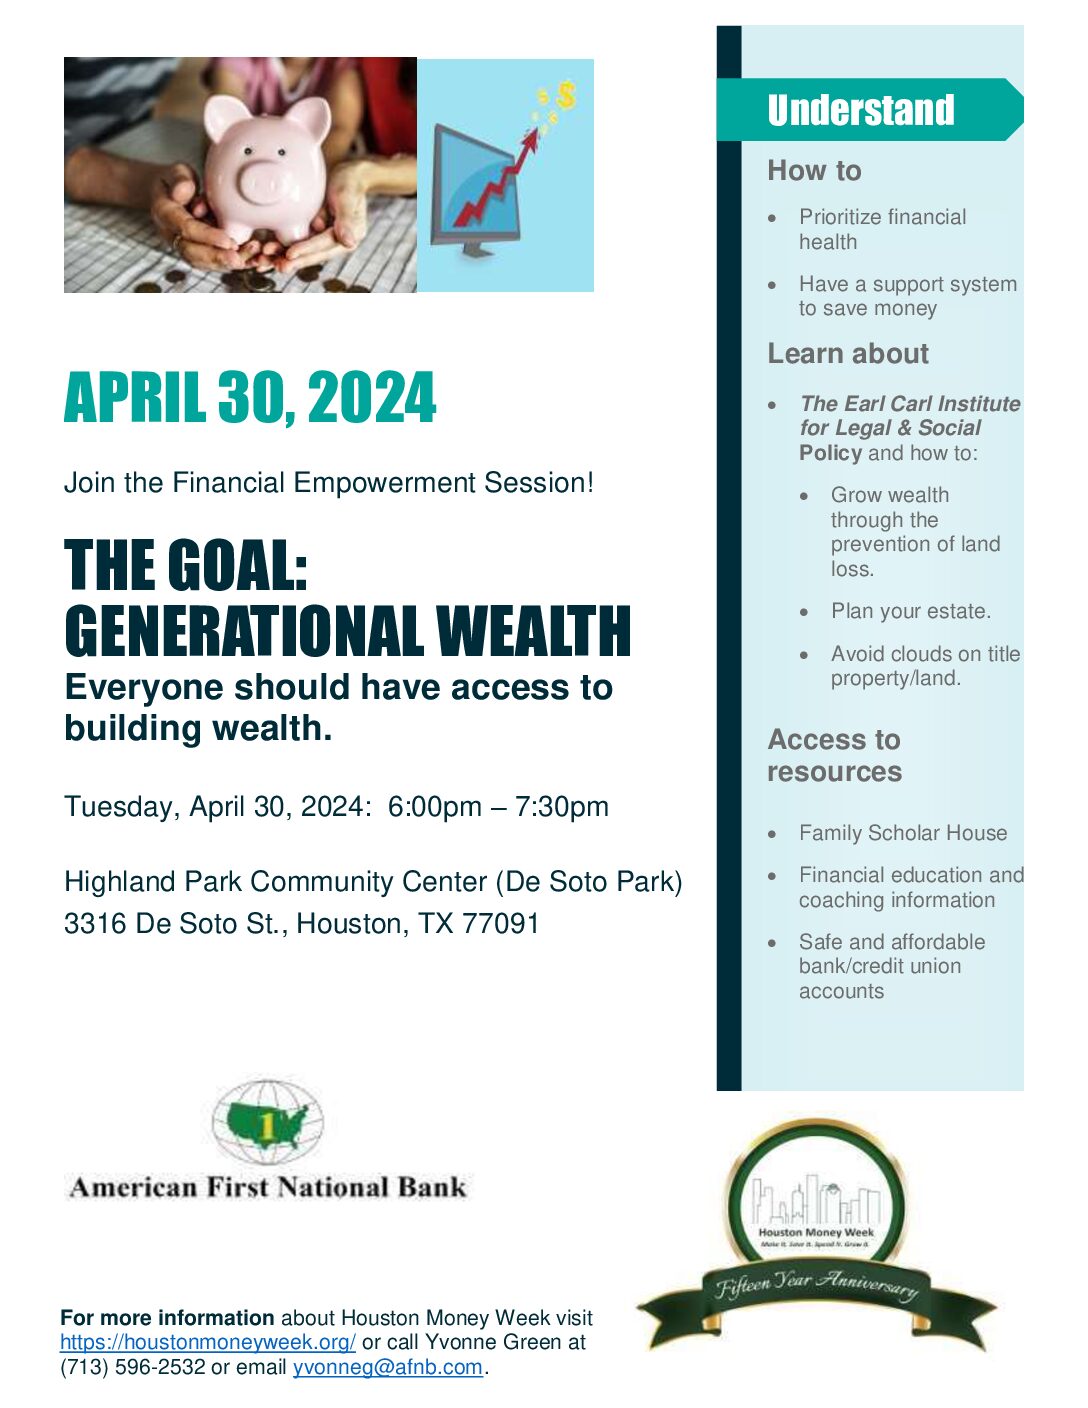 The Goal:  Generational Wealth